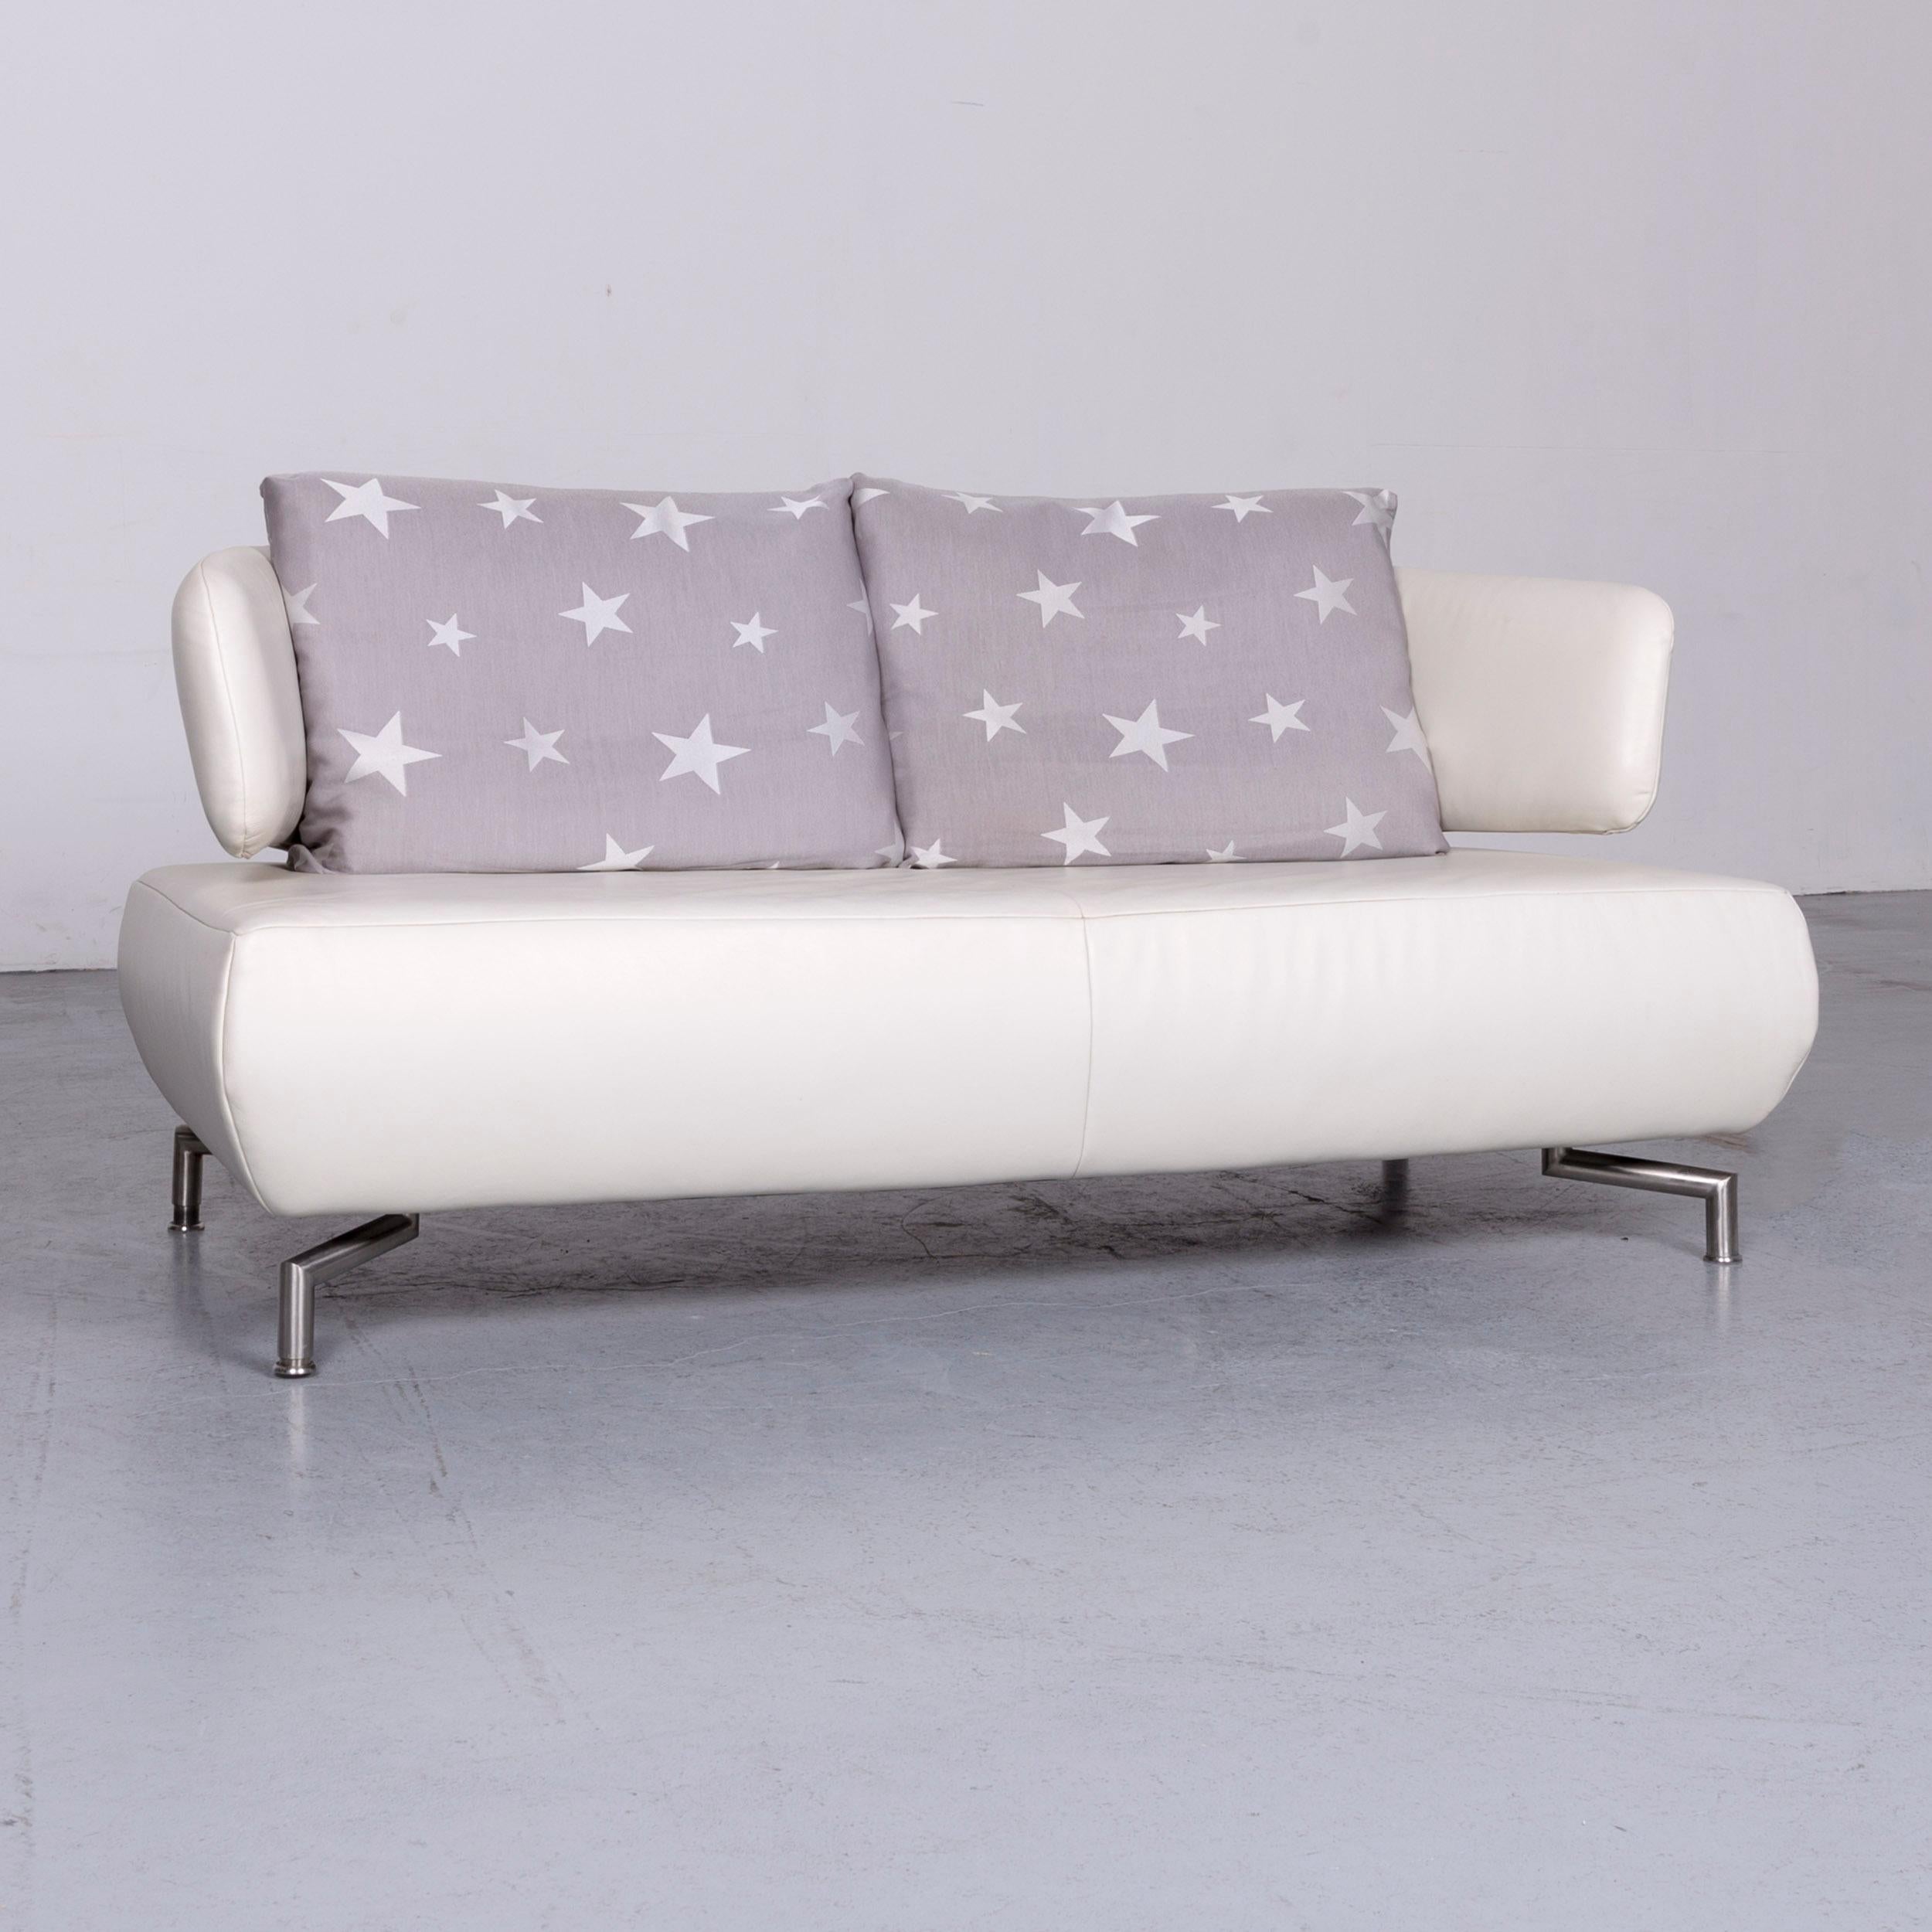 We bring to you a Koinor designer two-seat sofa white leather couch with pillow.